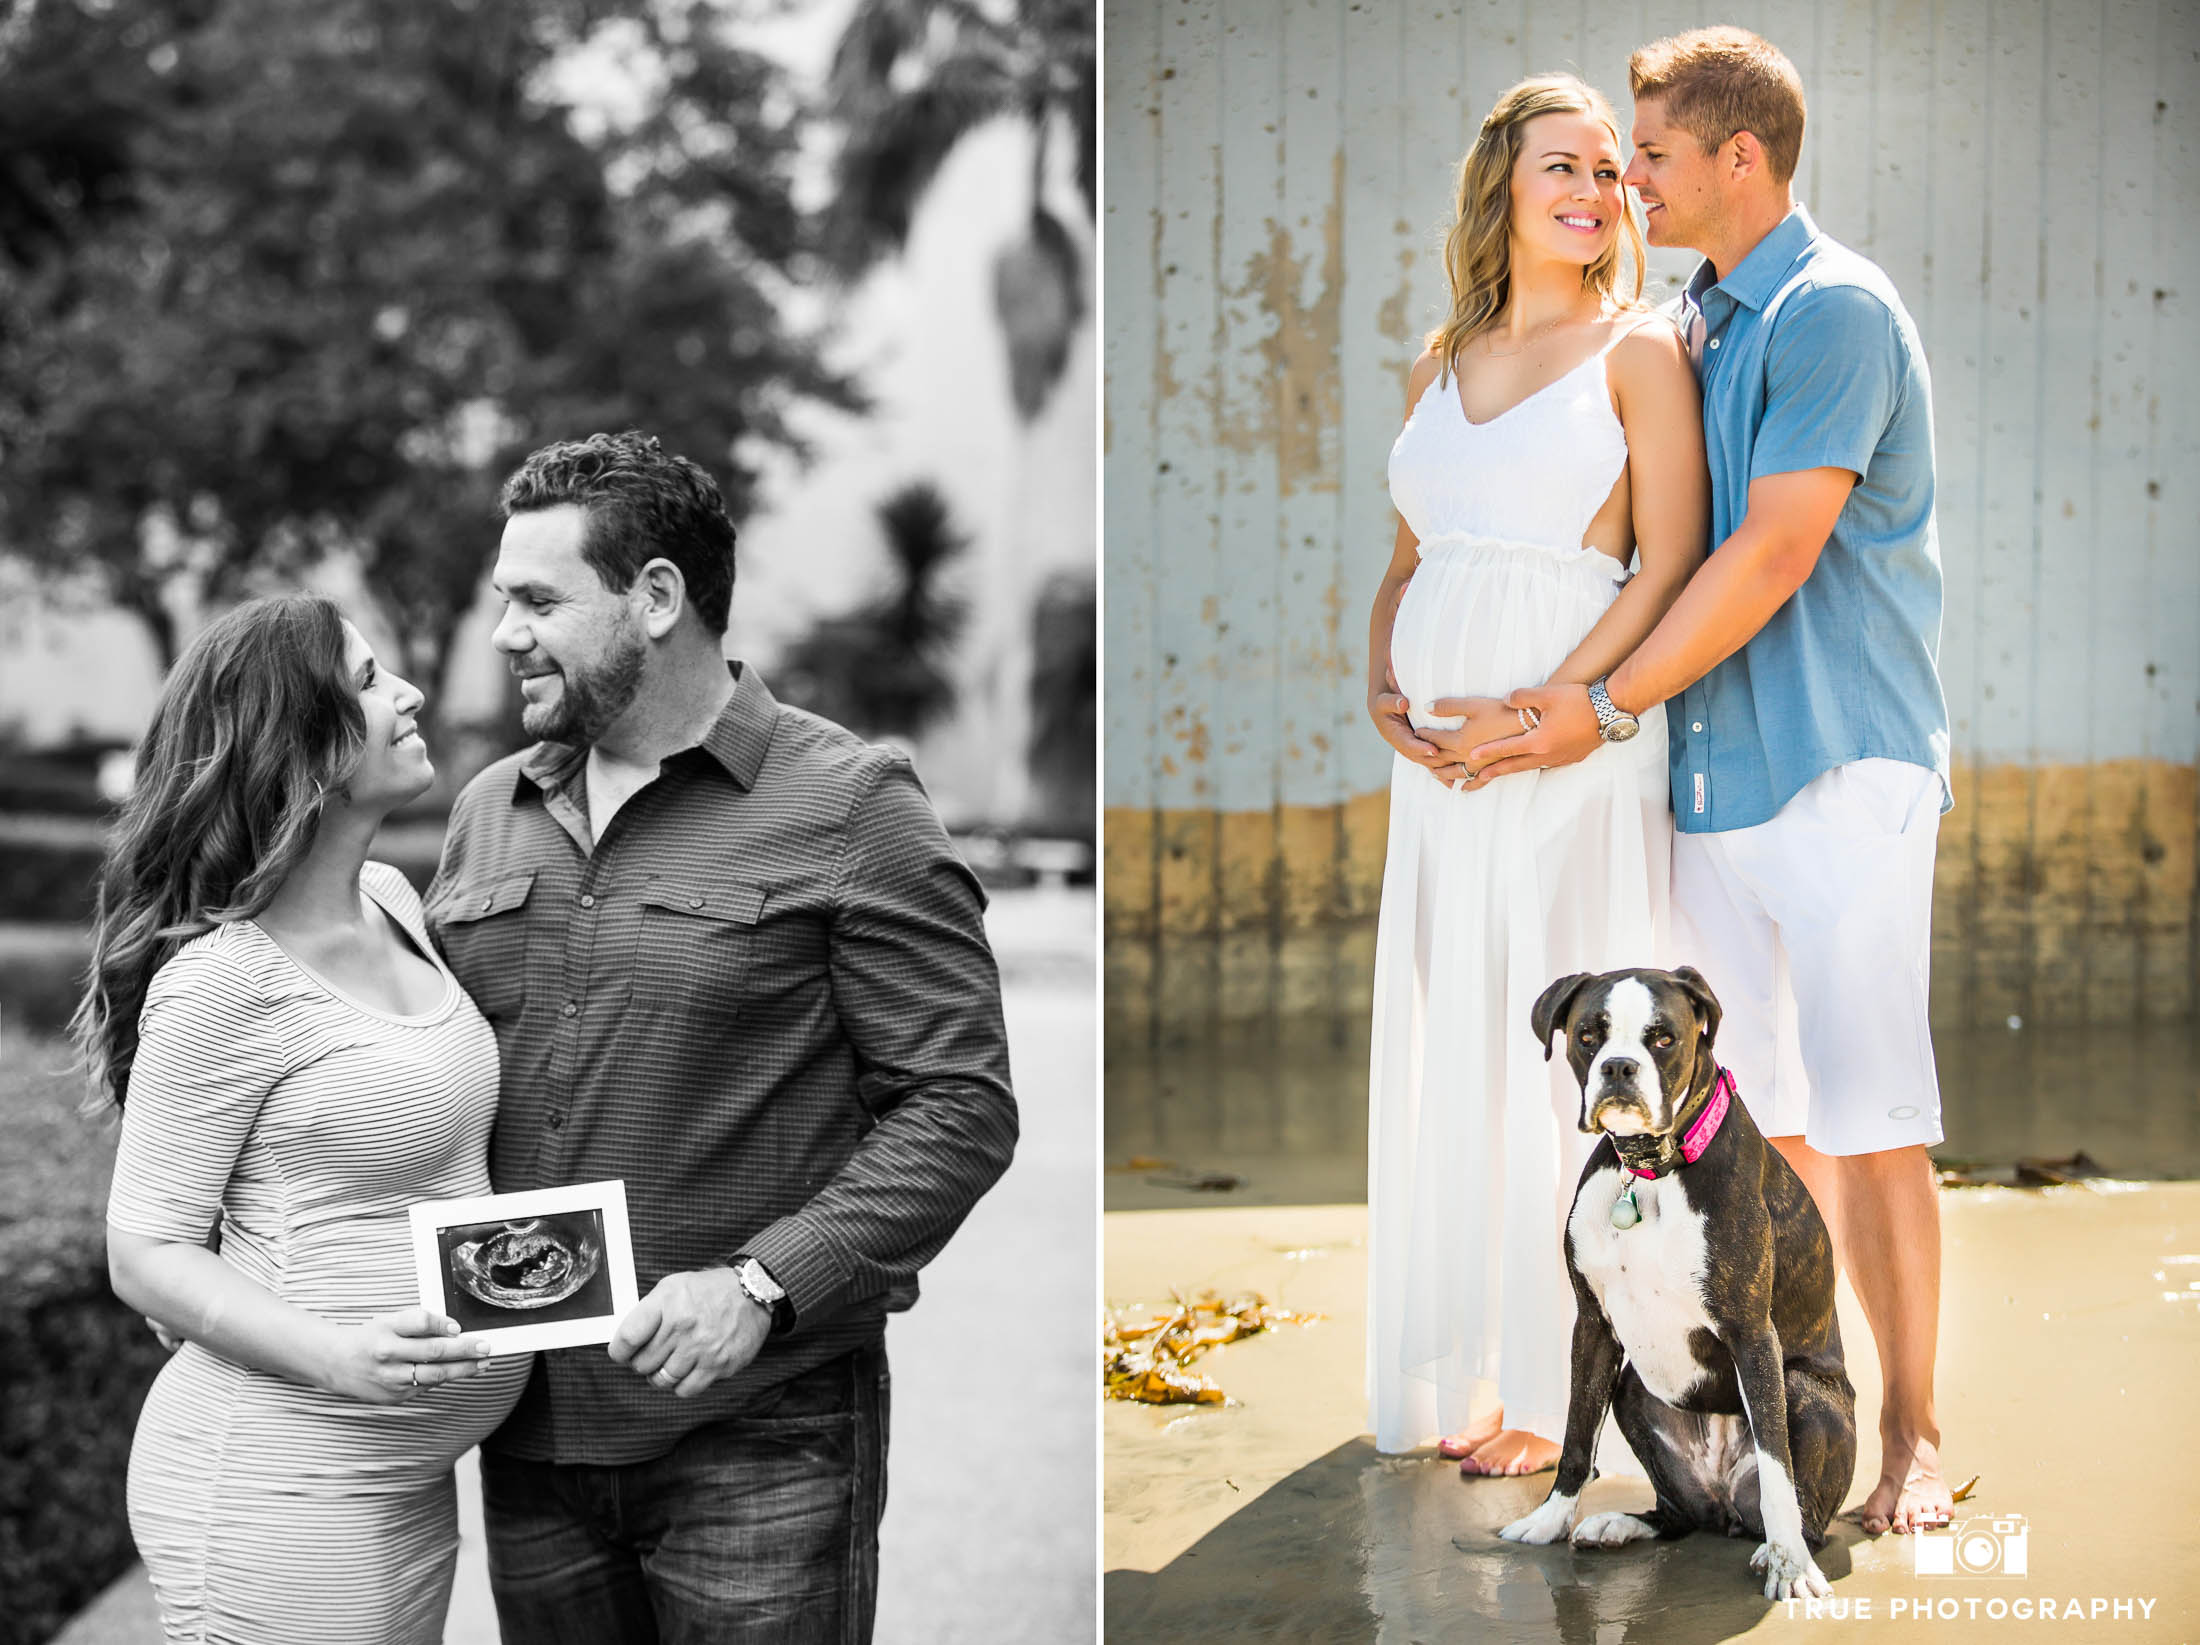 Married couples incorporate personalized props into maternity sessions